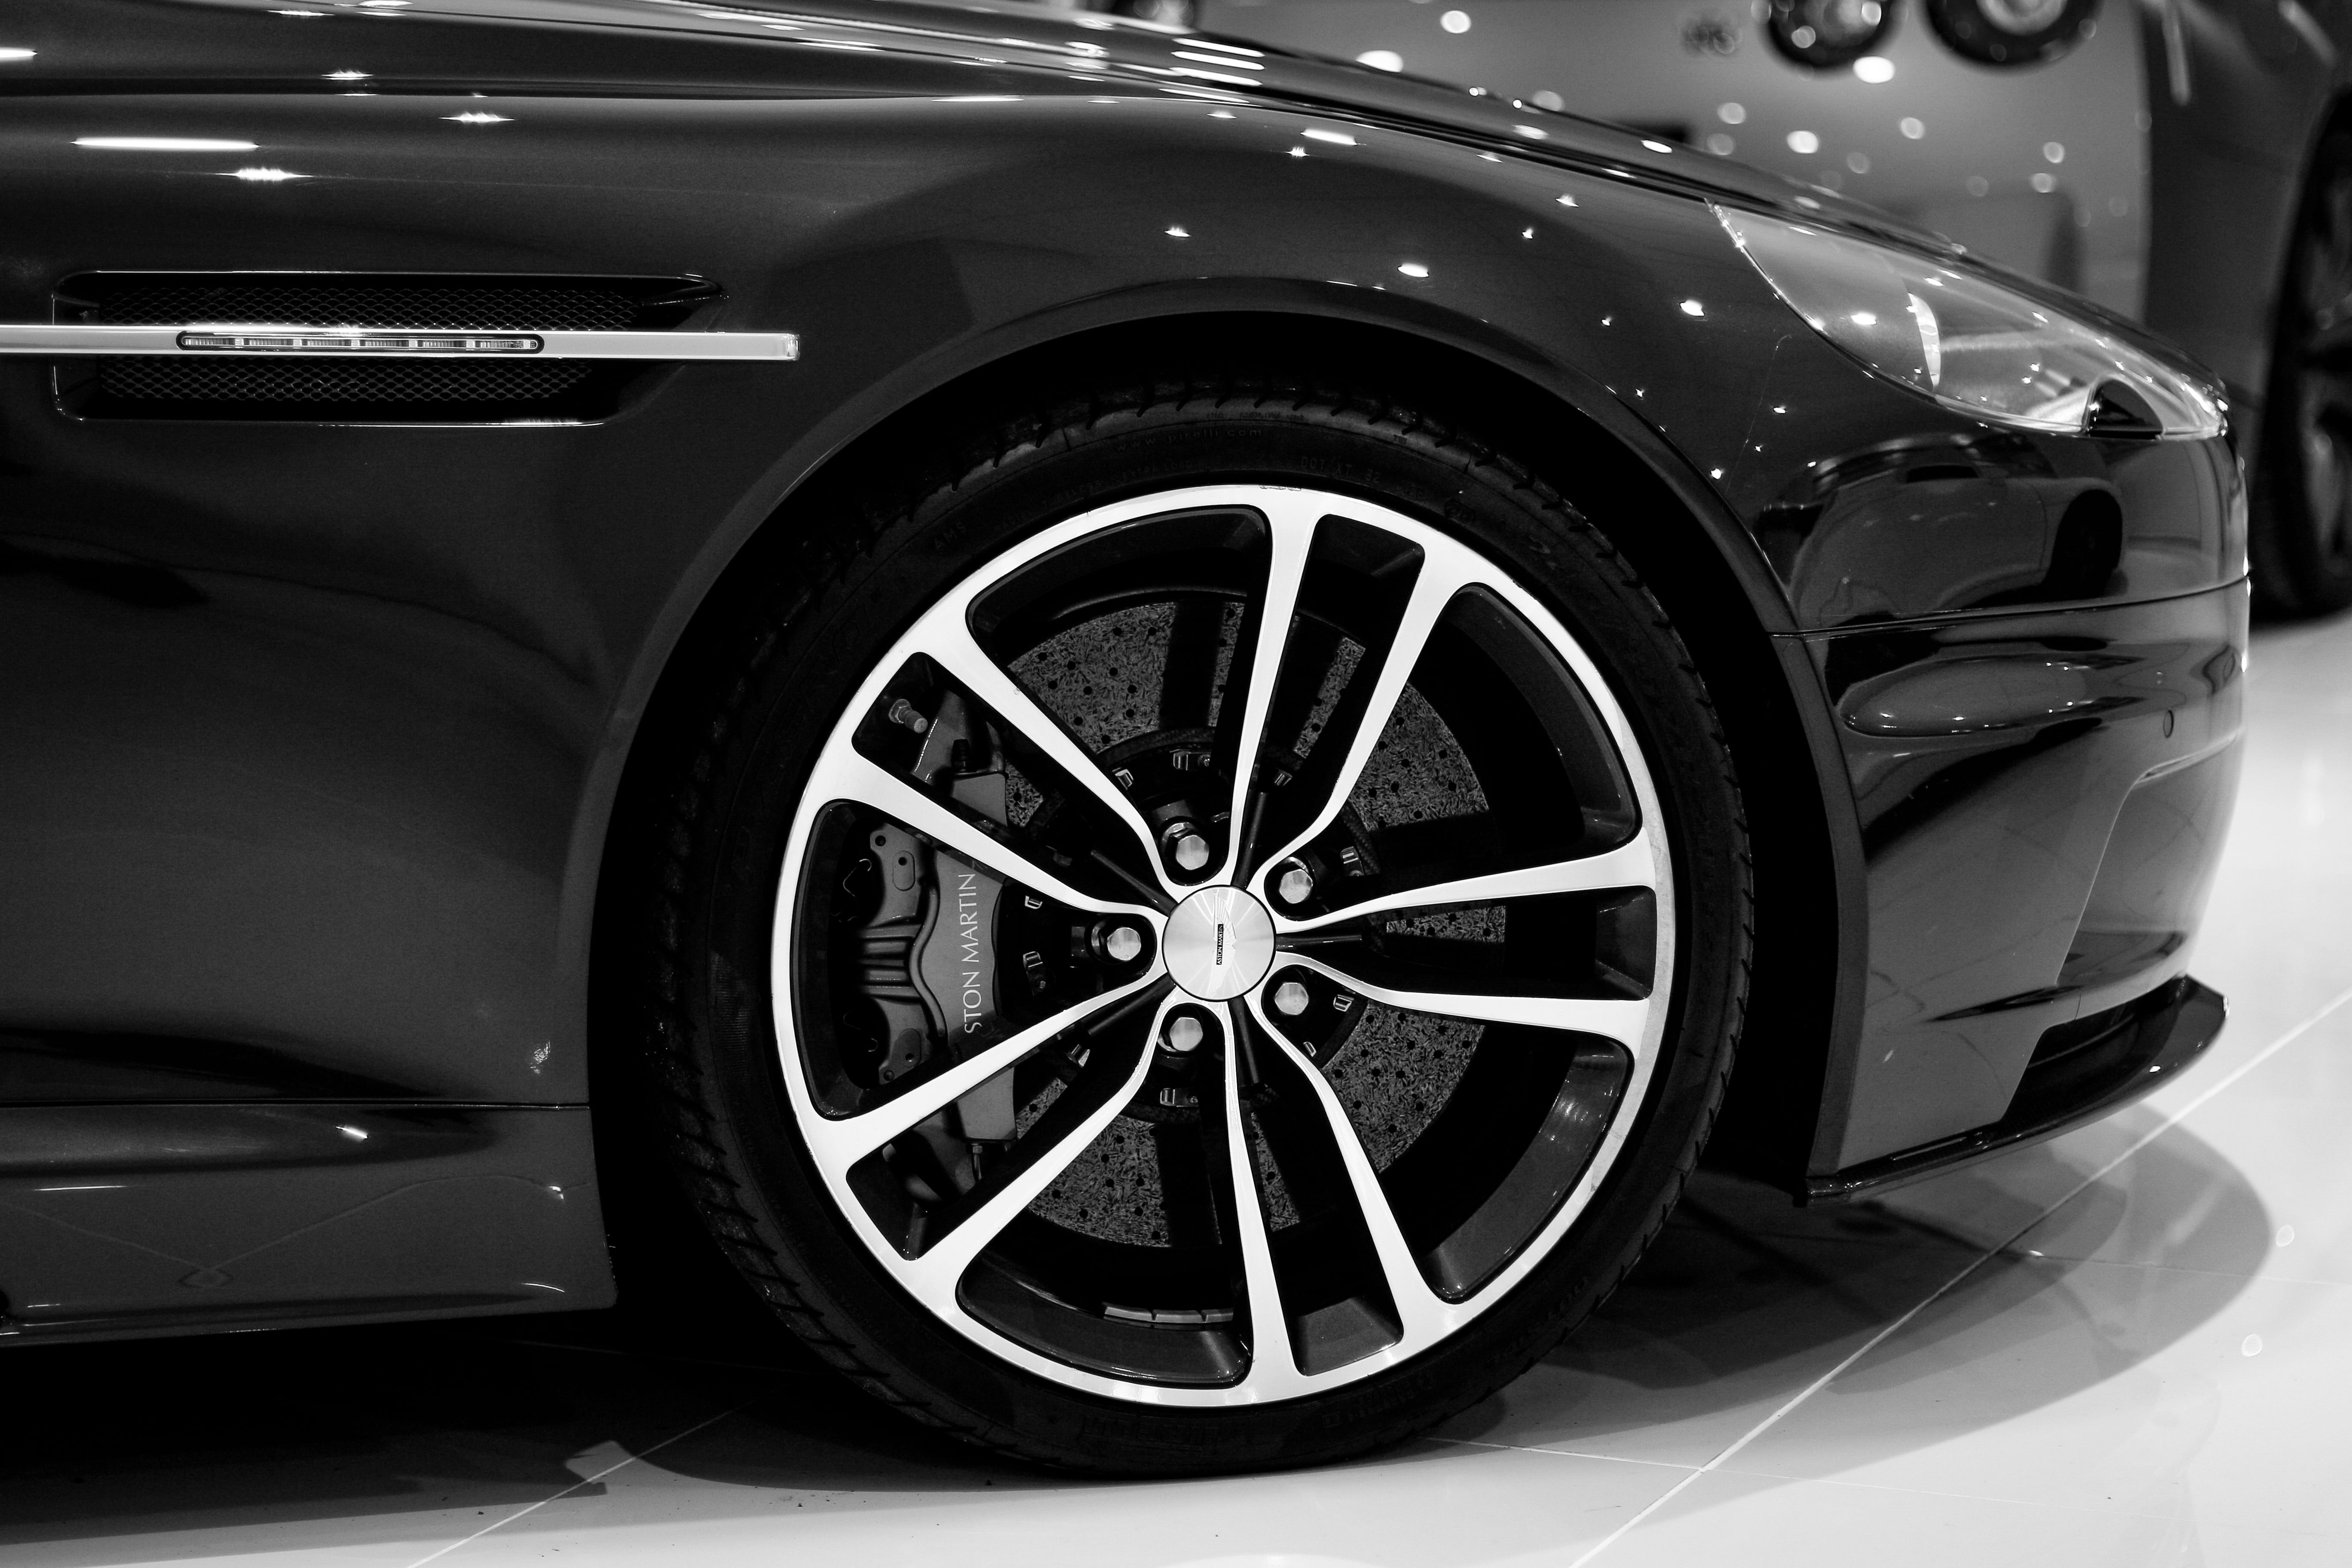 photography of chrome-colored 5-spoke vehicle wheel and tire